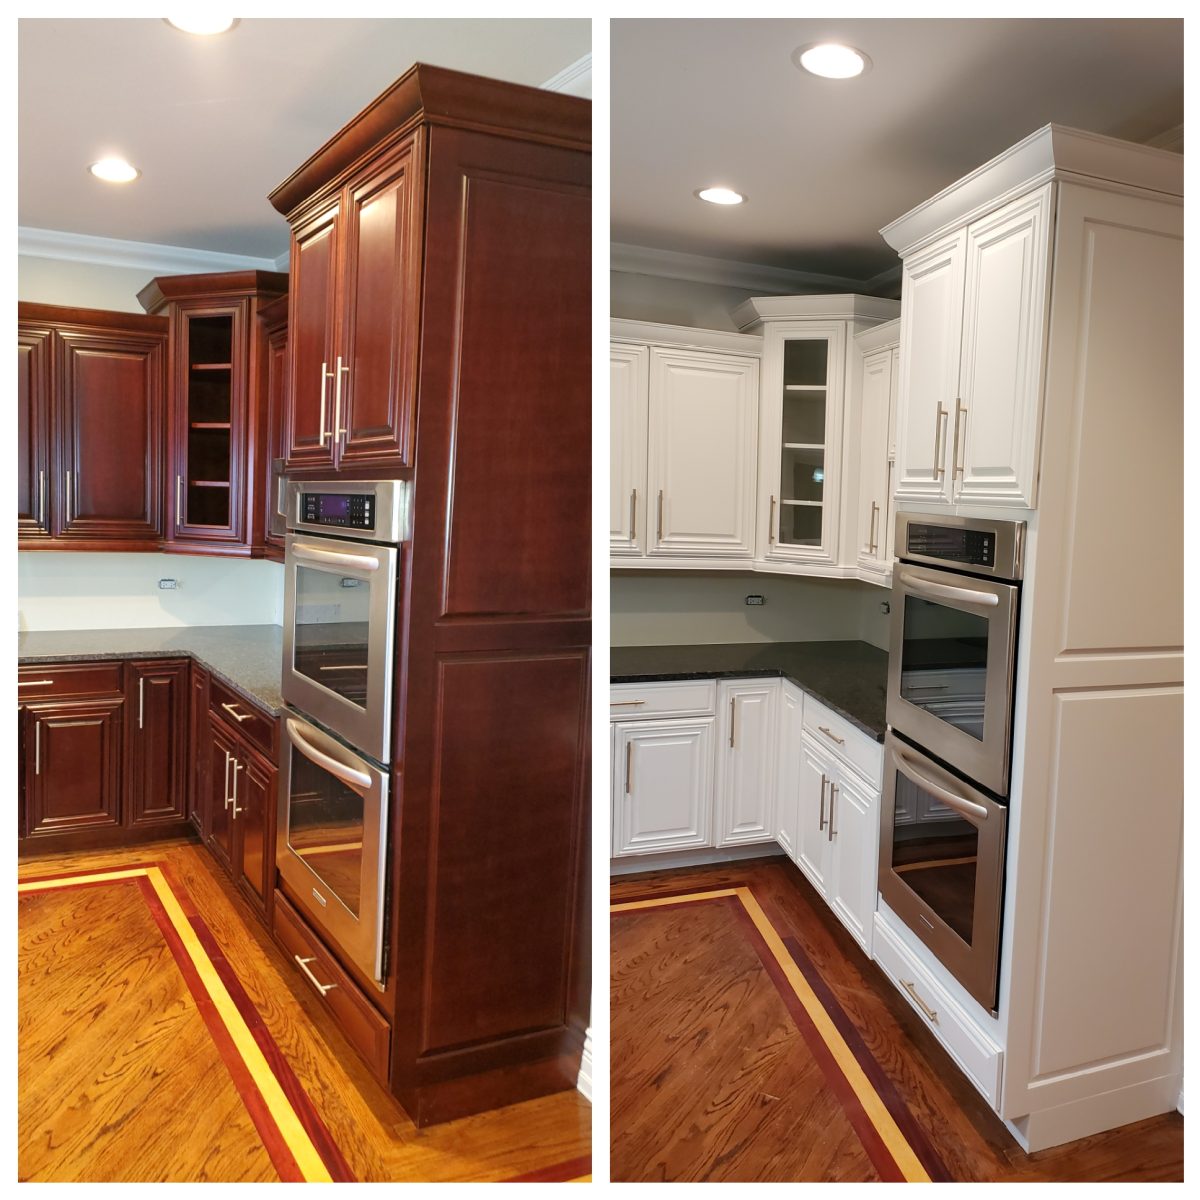 Tips For Painting Cherry Cabinets White, Dark Cherry Cabinets With White Countertops